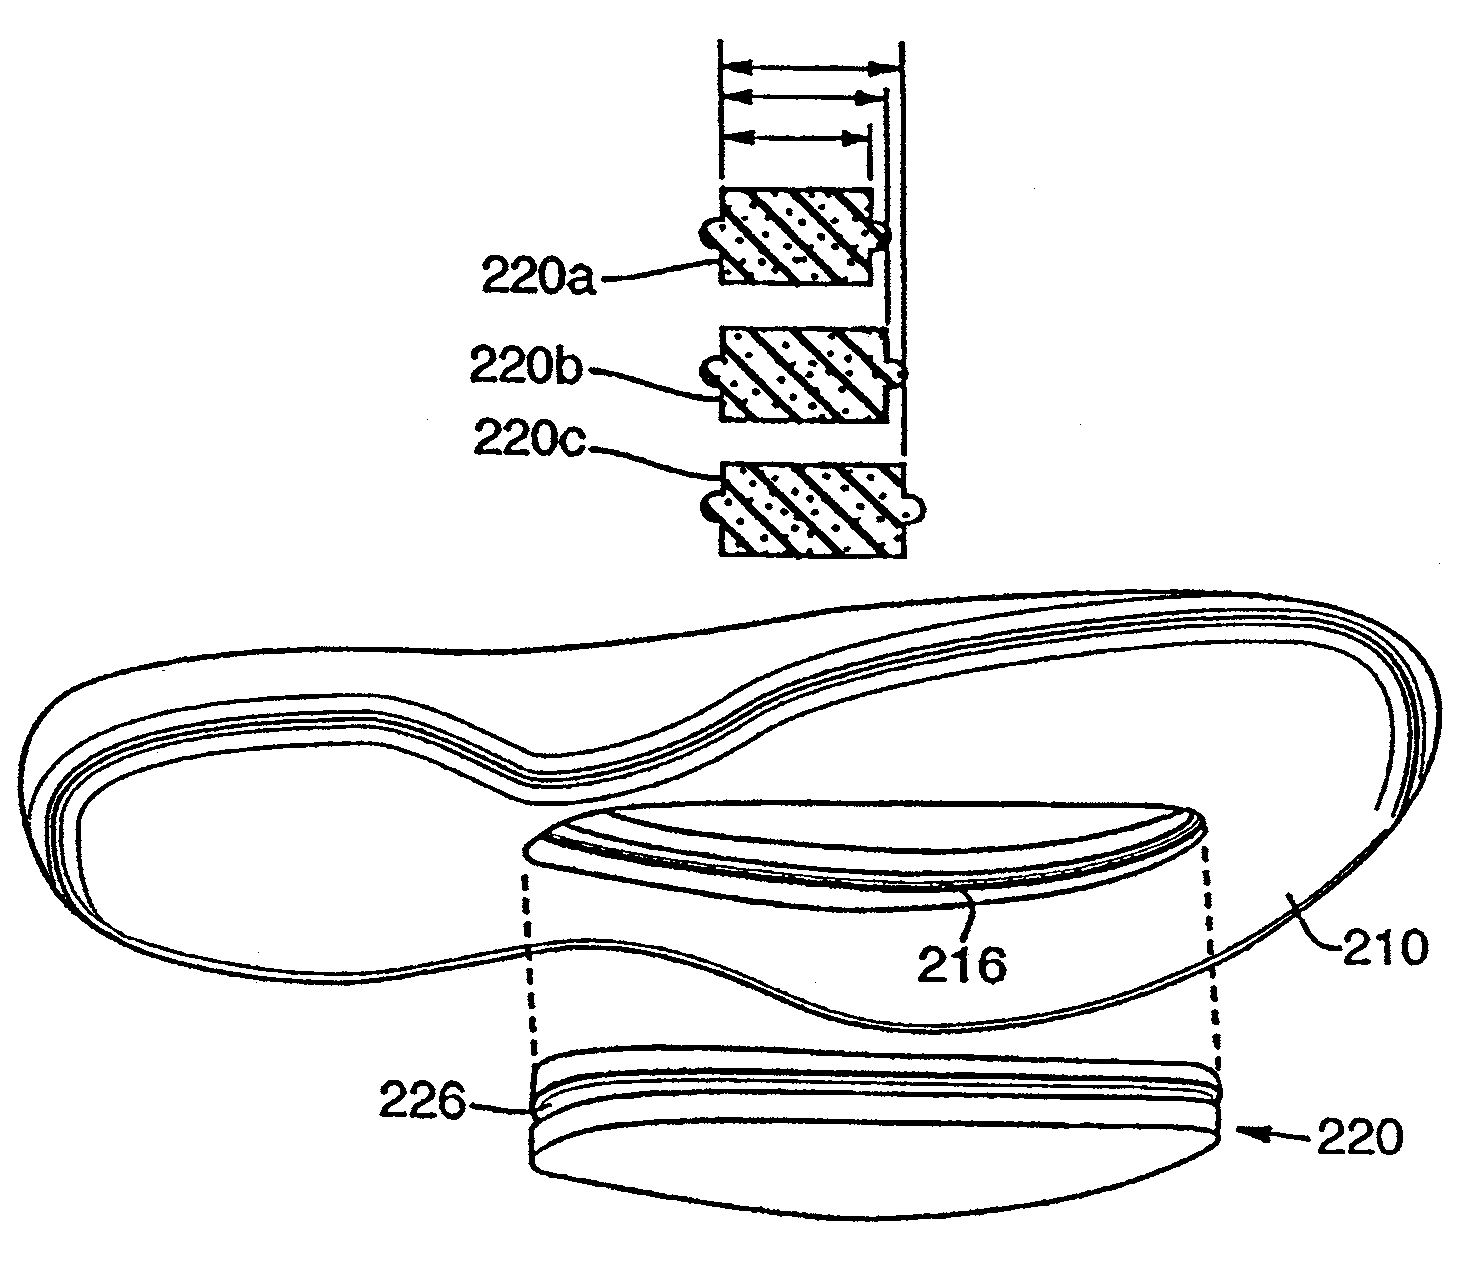 System for modifying properties of an article of footwear